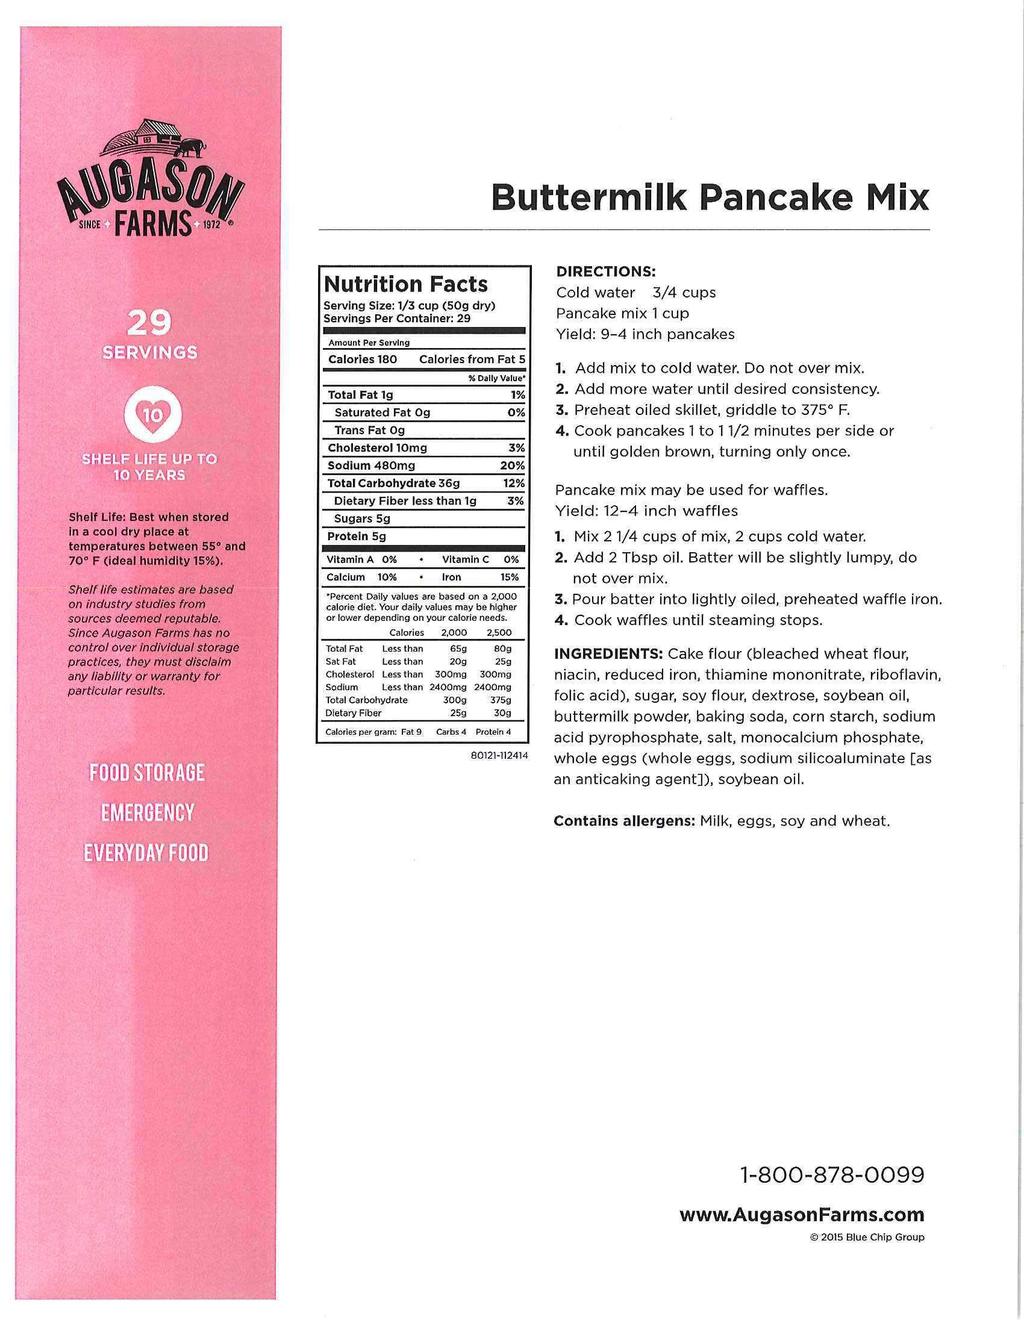 Buttermilk Pancake Mix temperatu es between 55 and Shelf life estimates a e based Since Augason Farms has no practices, they must disclaim Serving Size: 1/3 cup (50g dry) Servings Per Container: 29